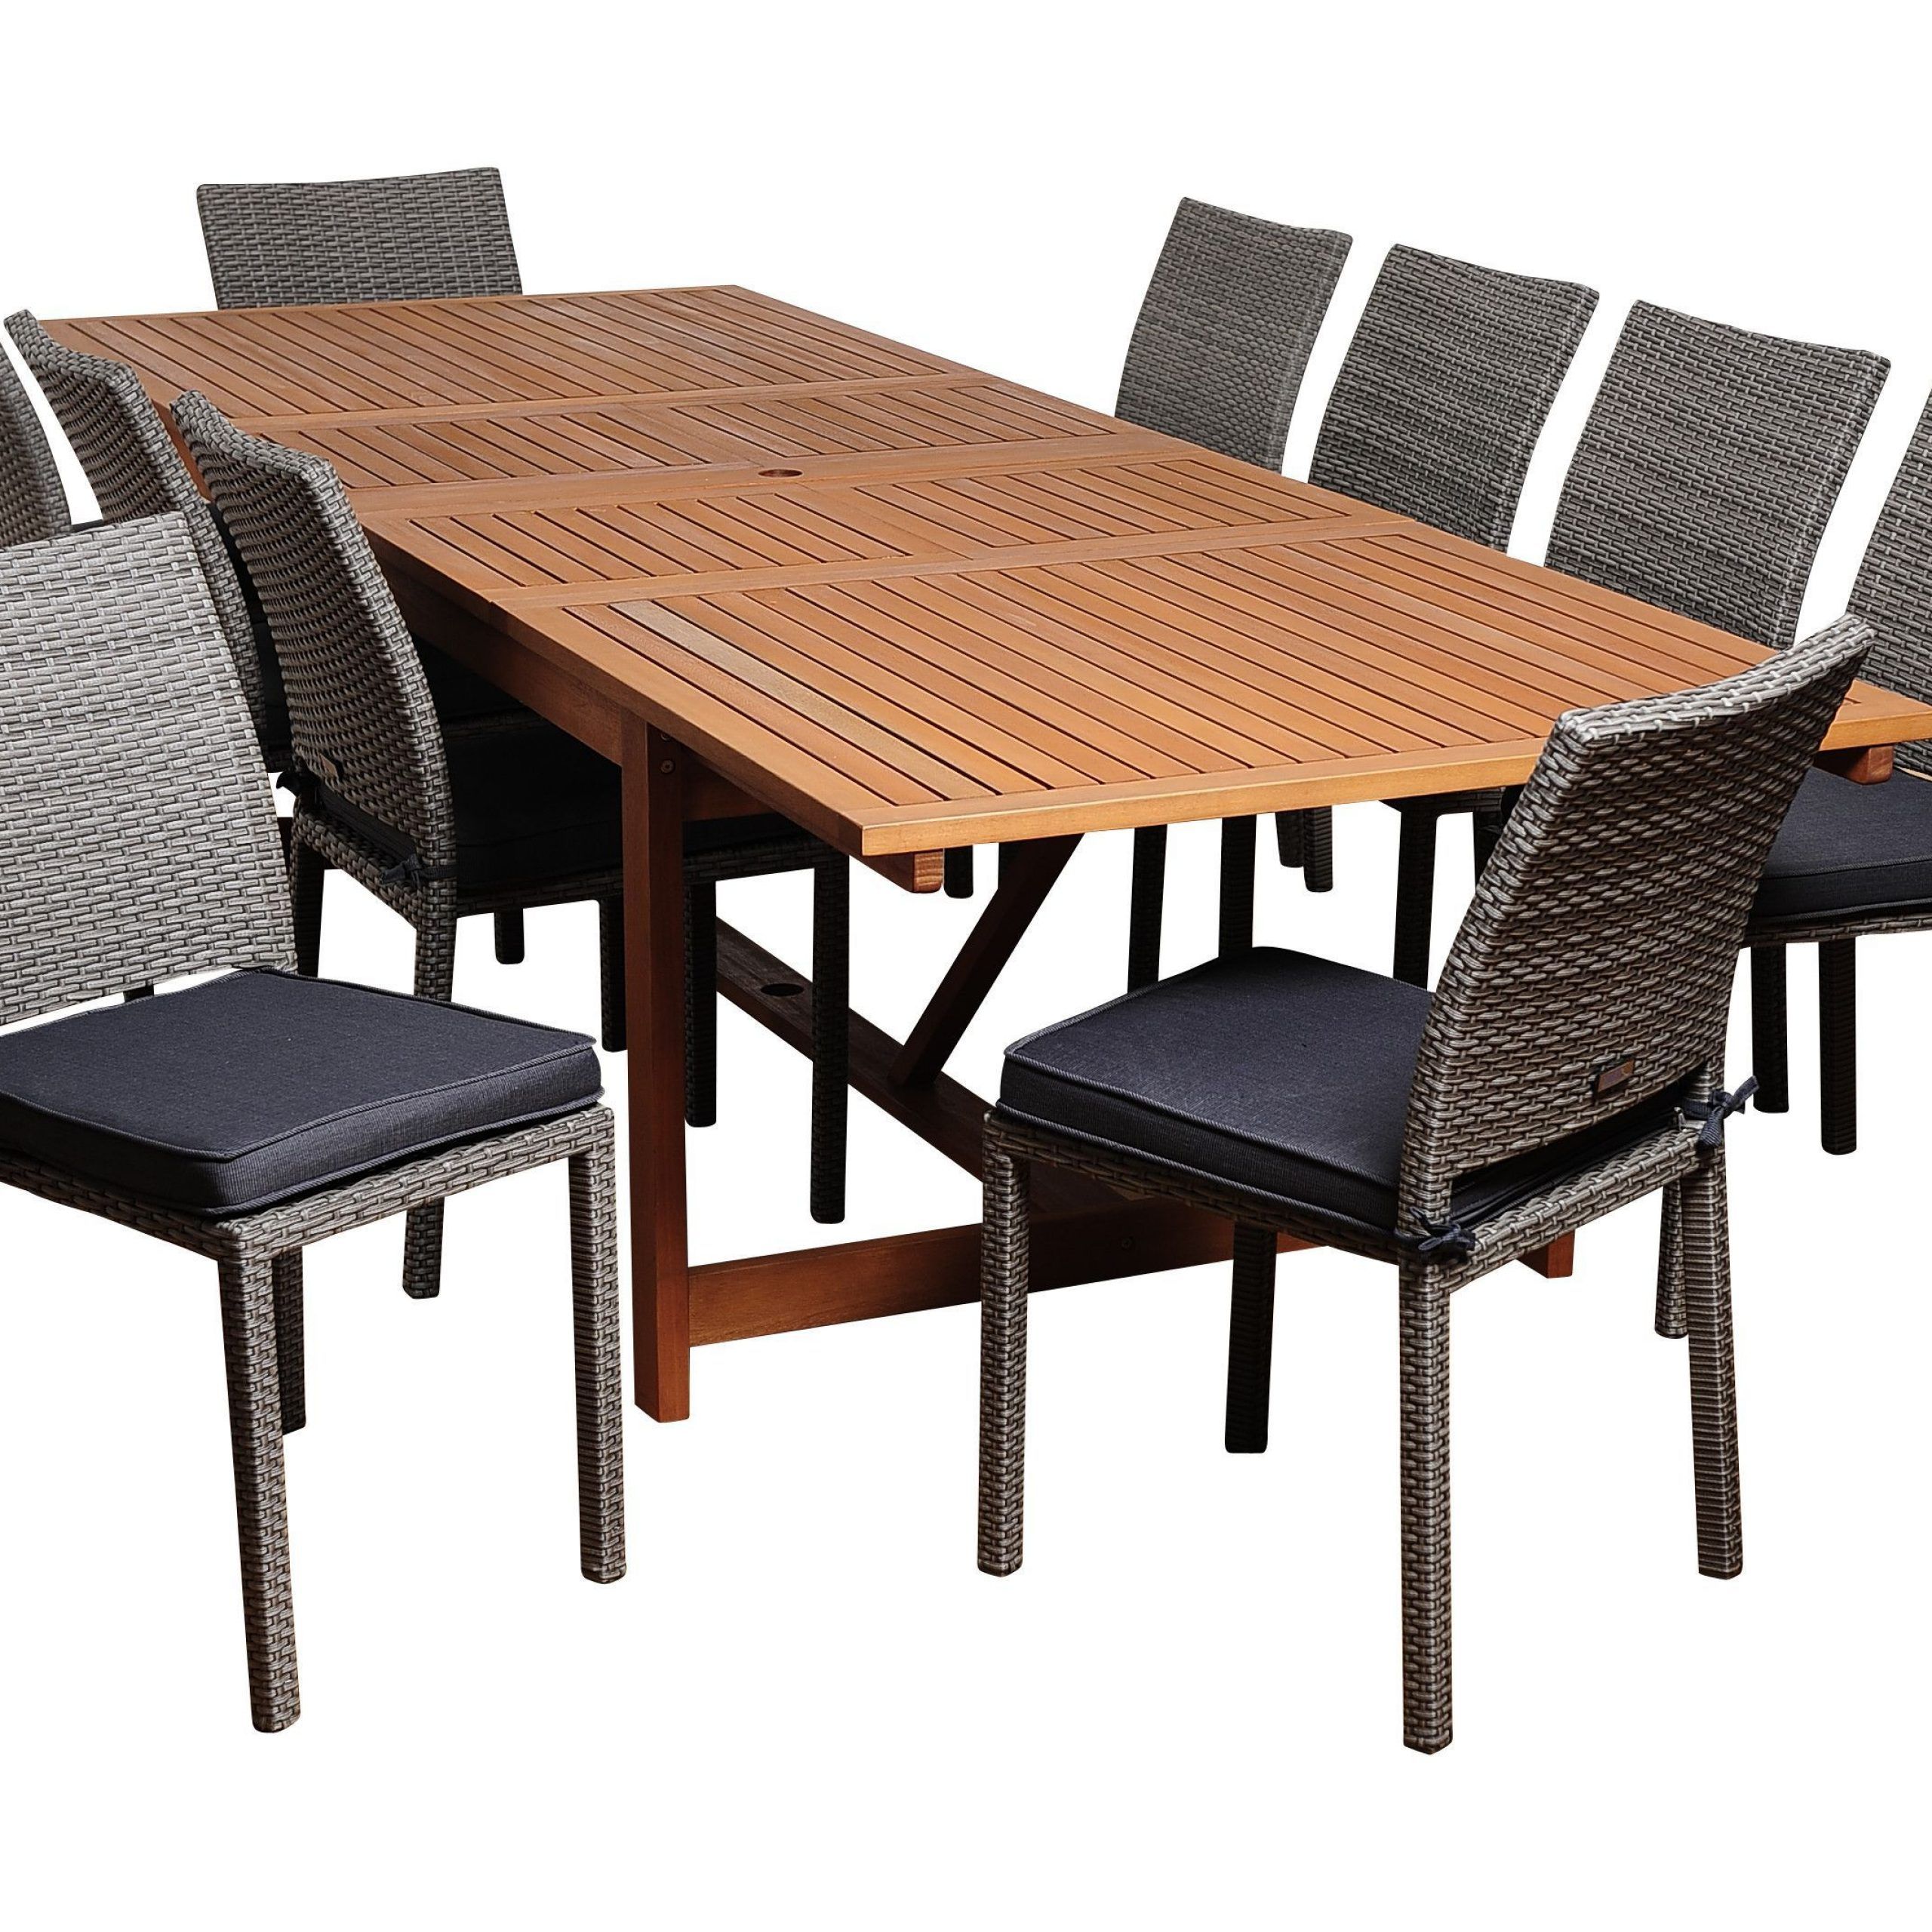 Gray Extendable Patio Dining Sets Within Best And Newest Angelo 11 Piece Eucalyptus/wicker Extendable Rectangular Patio Dining (View 15 of 15)